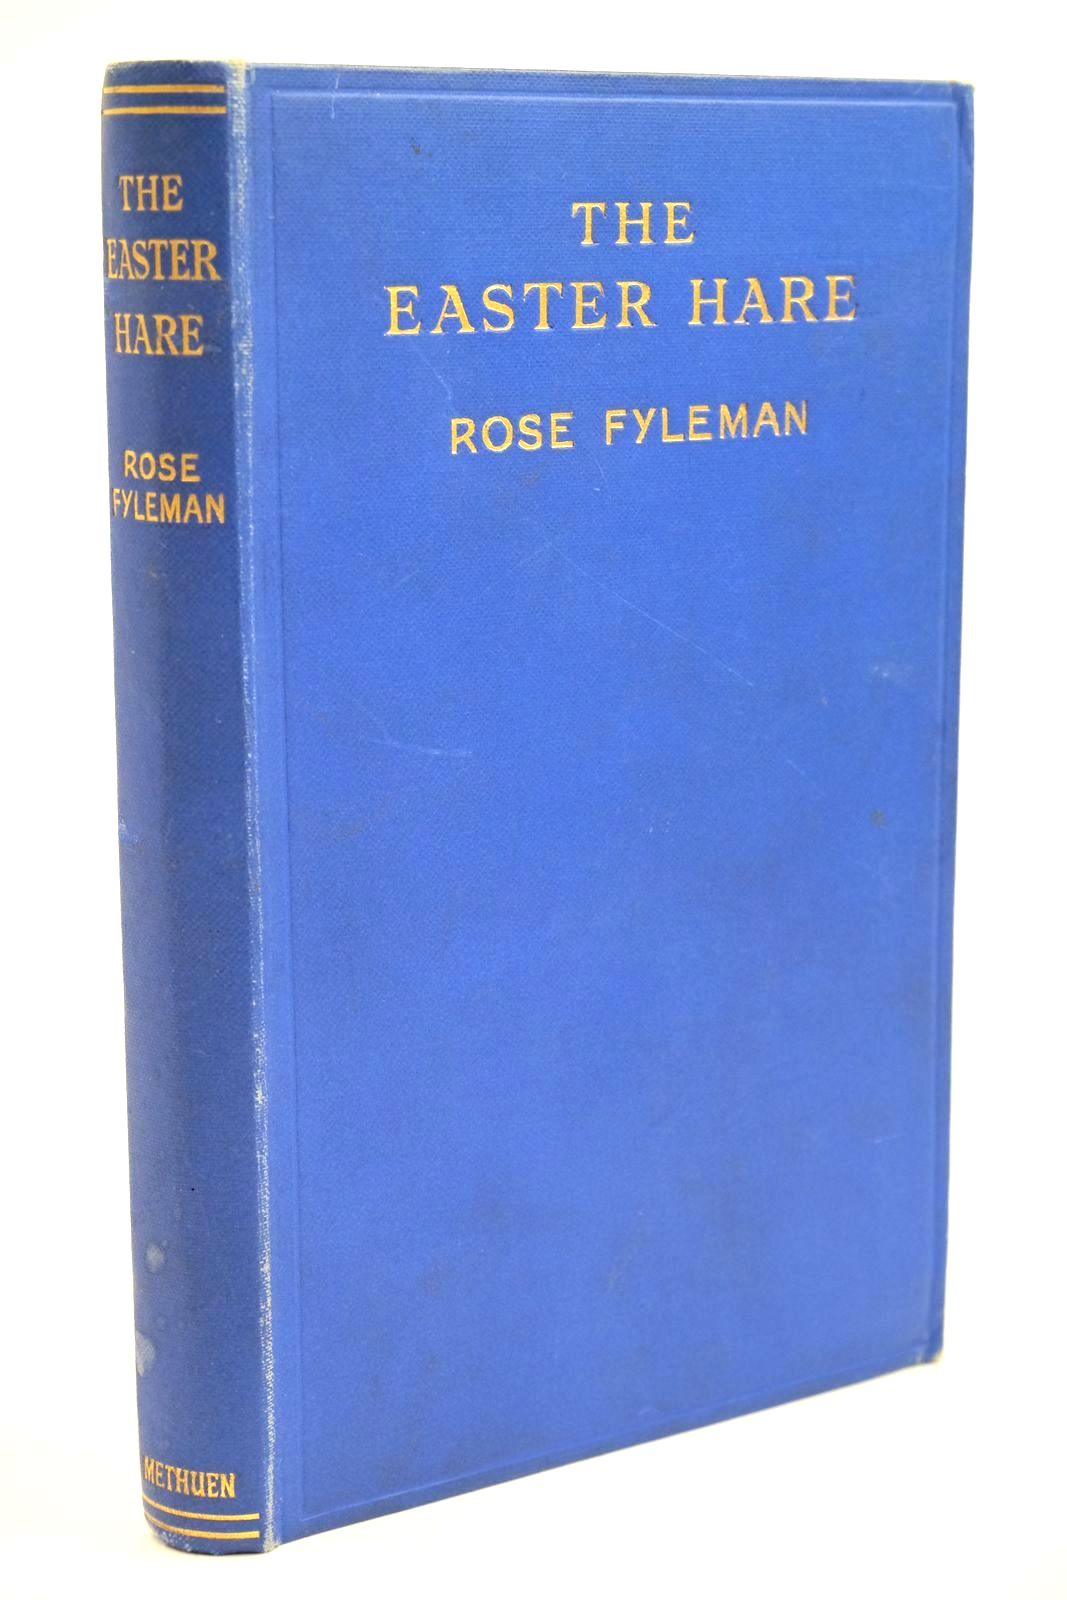 Photo of THE EASTER HARE written by Fyleman, Rose illustrated by Merwin, Decie published by Methuen &amp; Co. Ltd. (STOCK CODE: 1323234)  for sale by Stella & Rose's Books